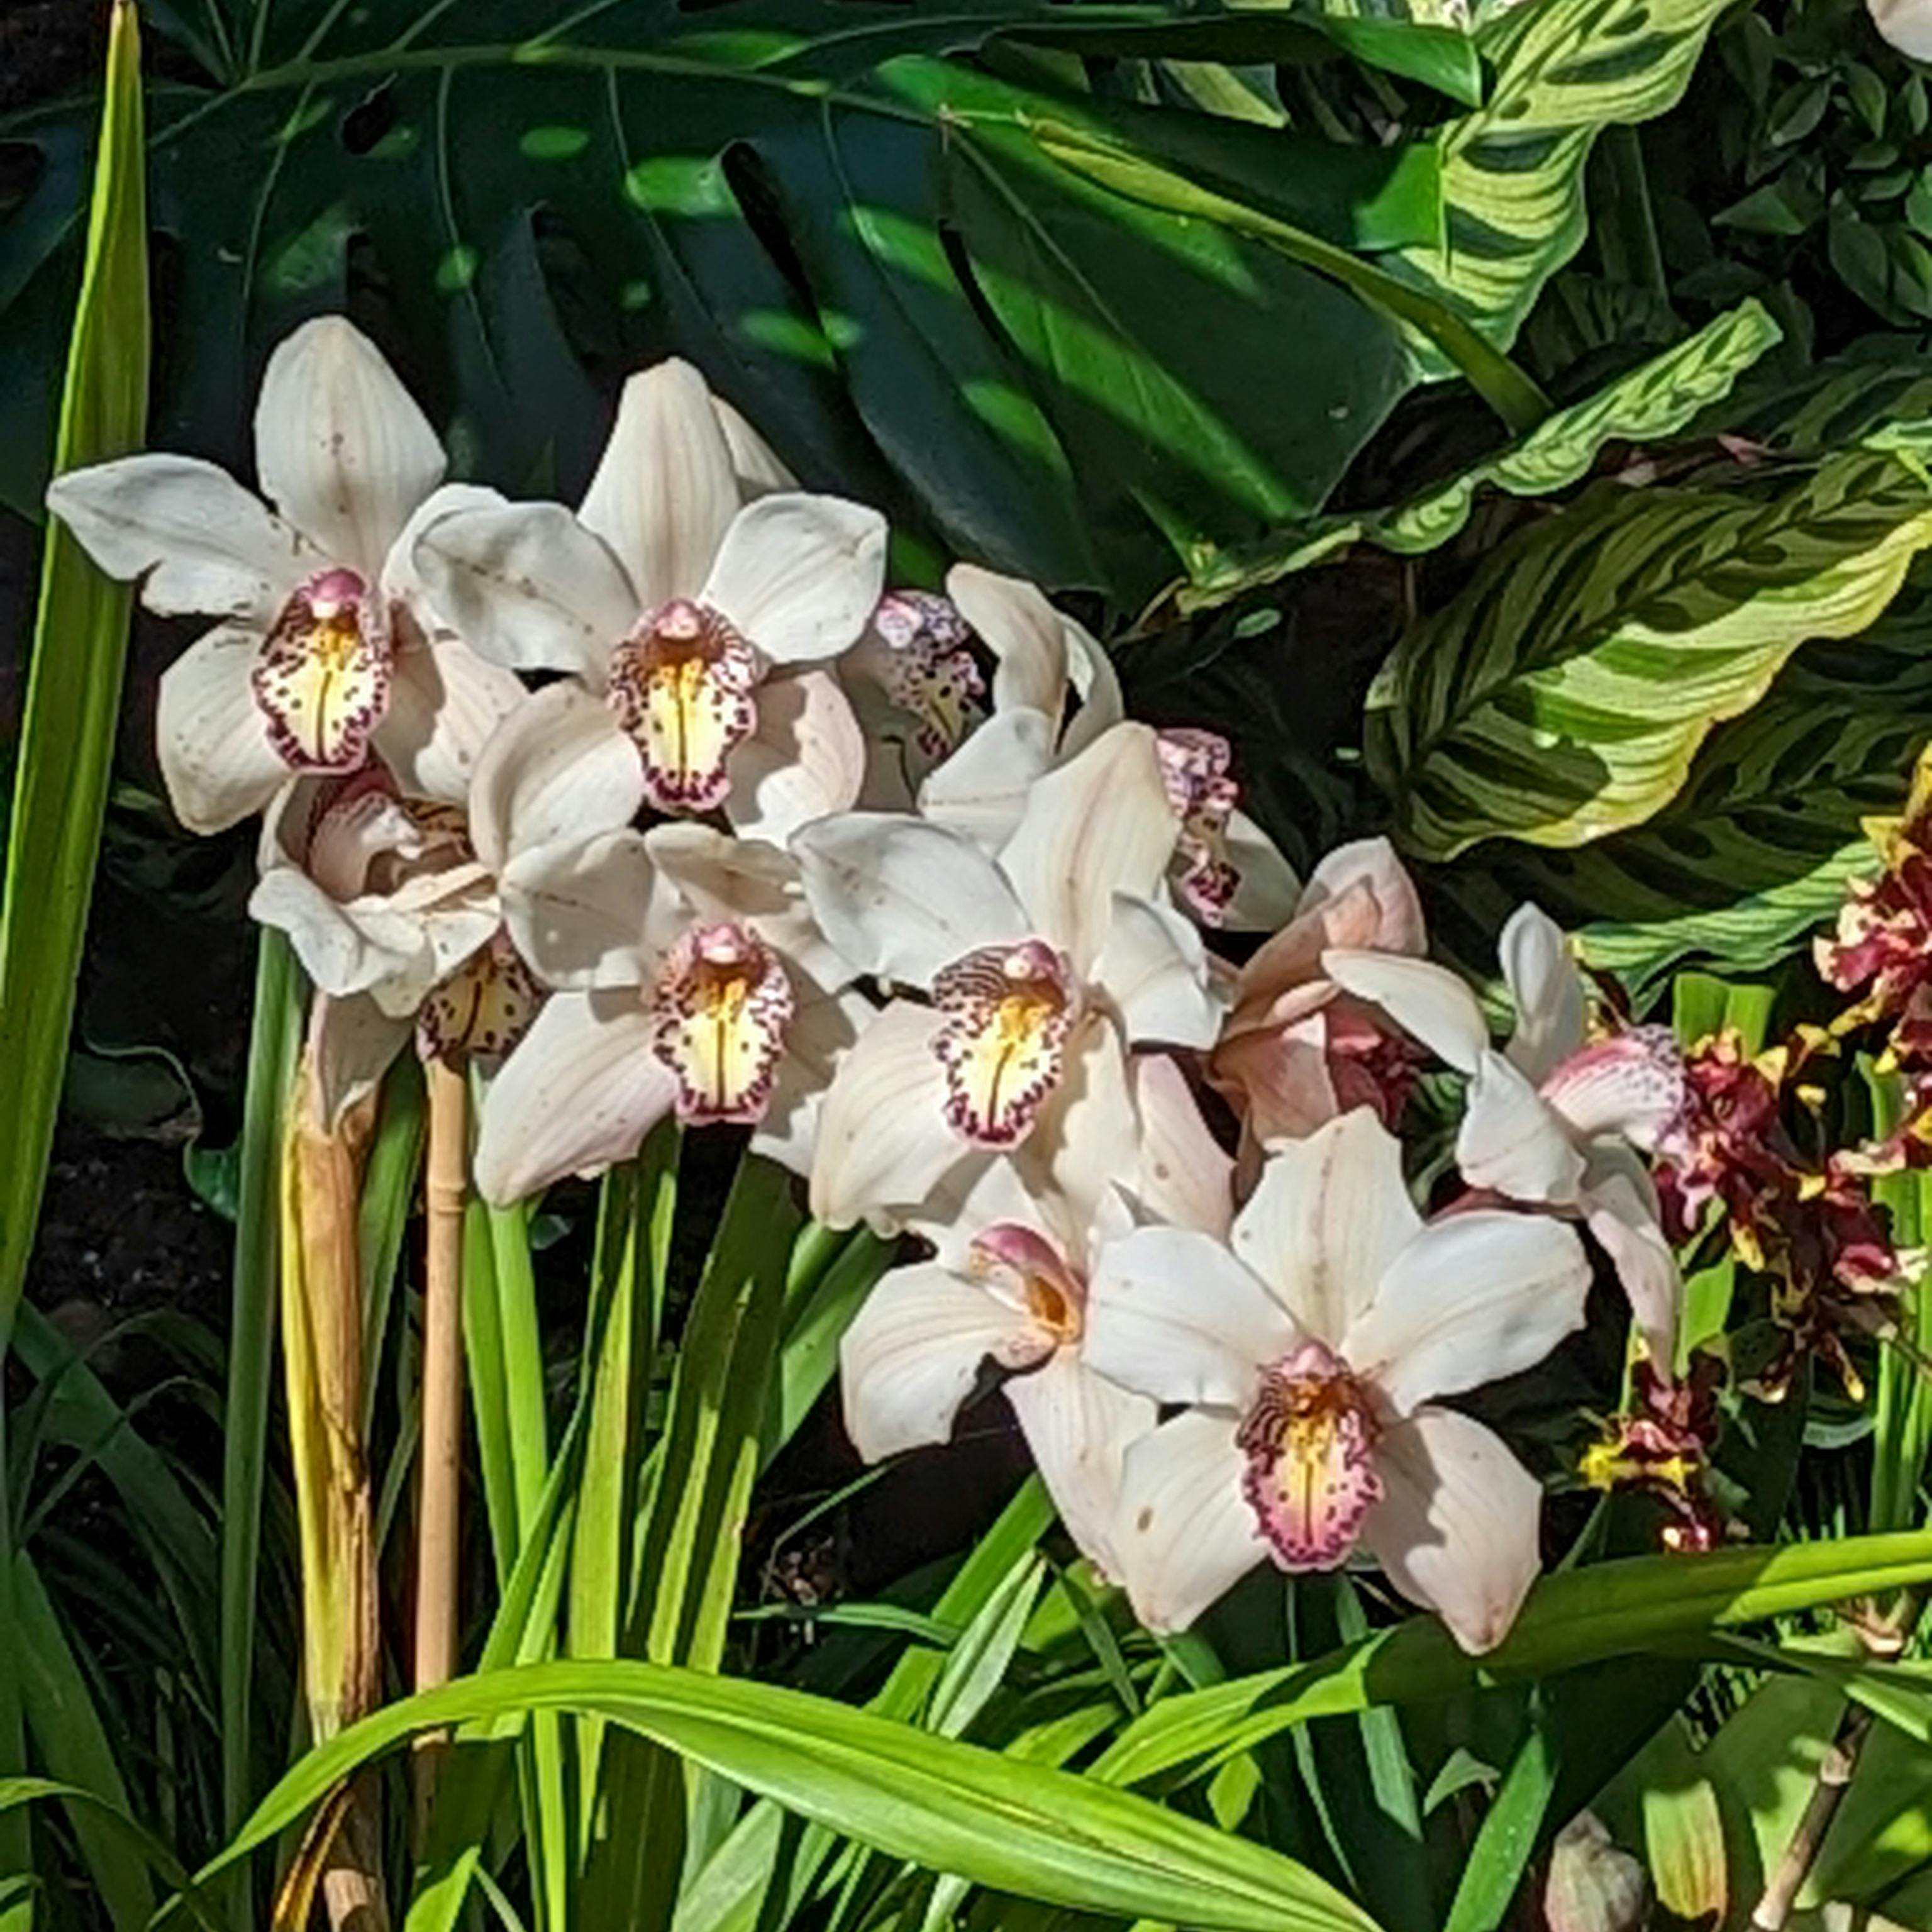 close up of orchids, white with yellow and purple centers against lush greenery